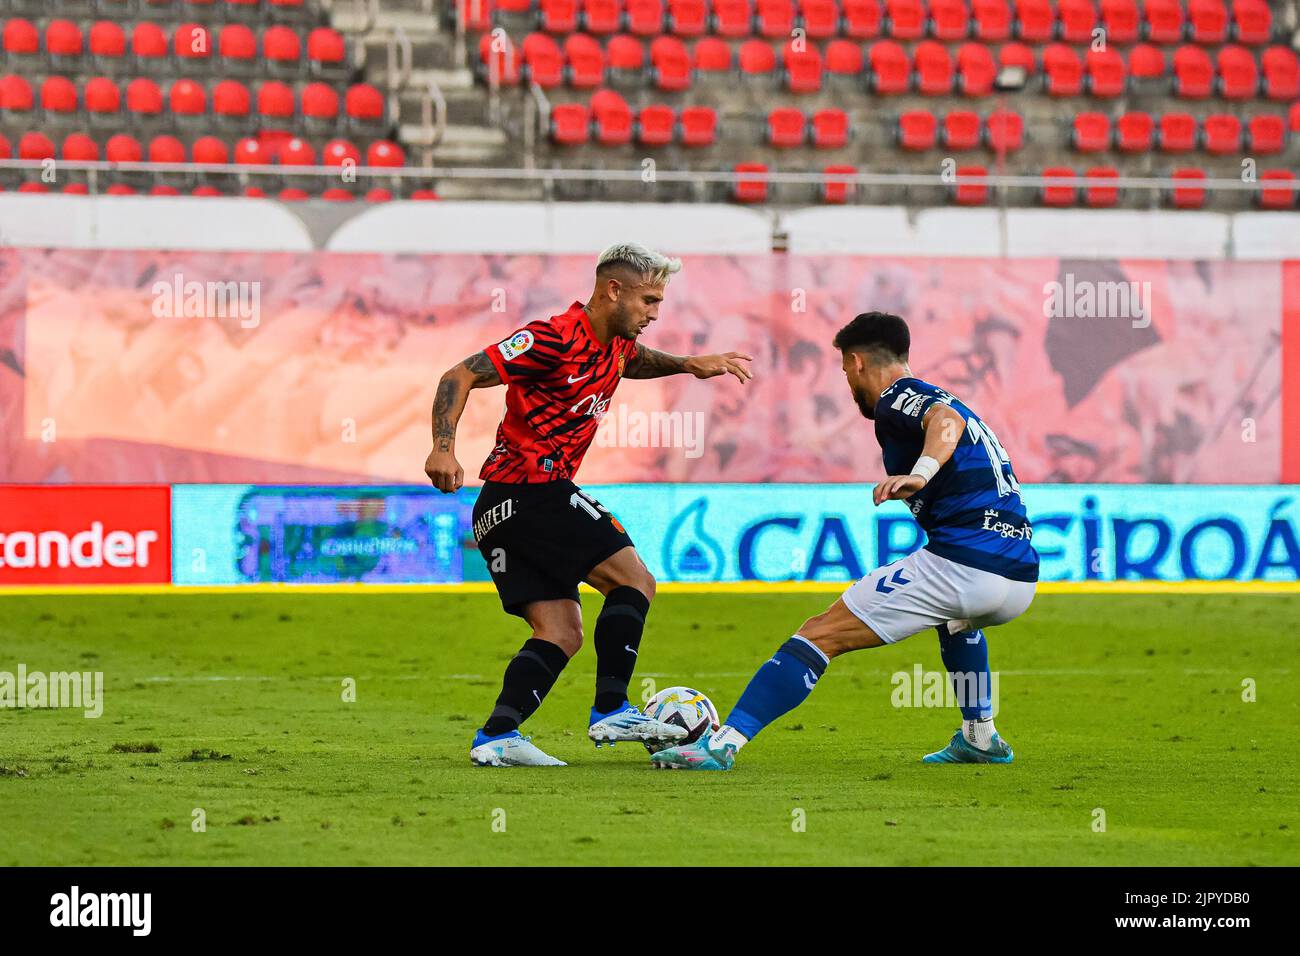 MALLORCA, SPAIN - AUGUST 20: Alex Moreno of Real Betis and Pablo Maffeo of RCD Mallorca in the match between RCD Mallorca and Real Betis of La Liga Santander on August 20, 2022 at Visit Mallorca Stadium Son Moix in Mallorca, Spain. (Photo by Samuel Carreño/PxImages) Stock Photo